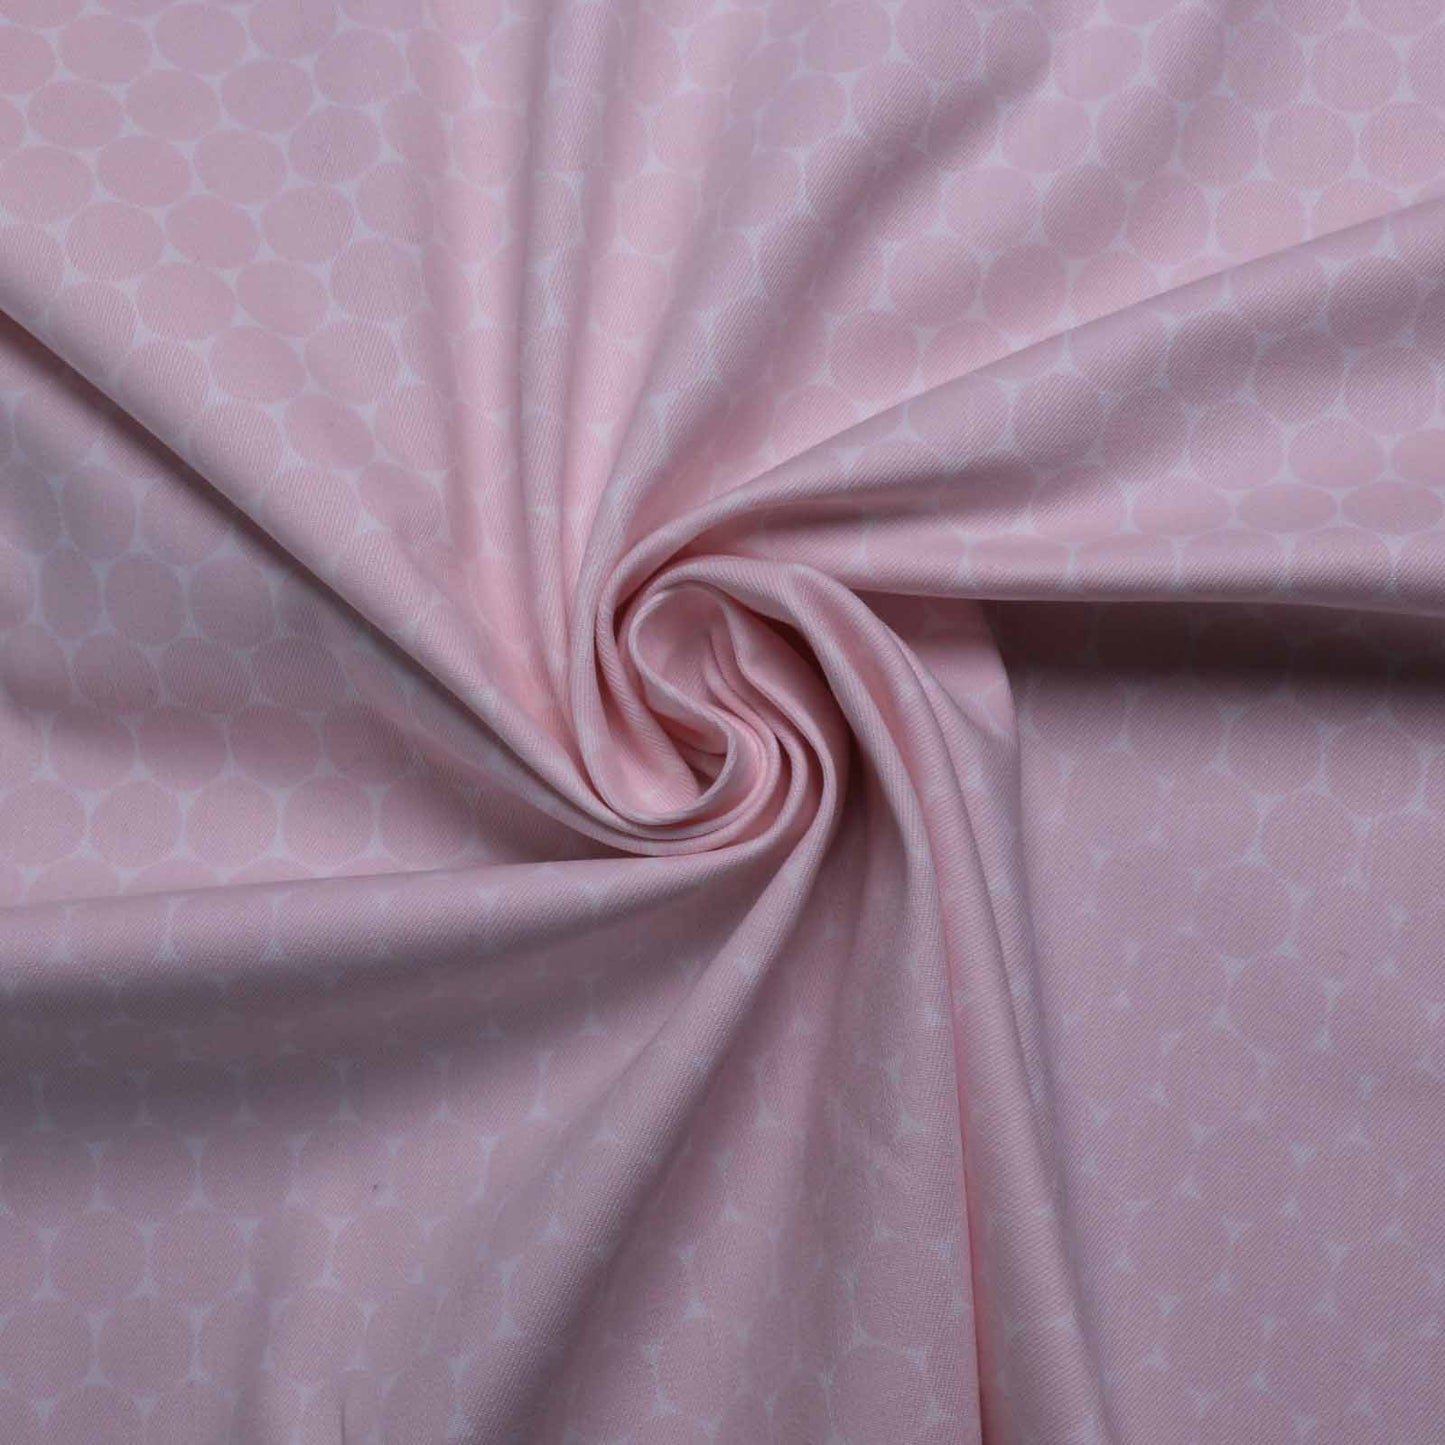 pale pink and white dotted stretchy cotton twill fabric for dressmaking